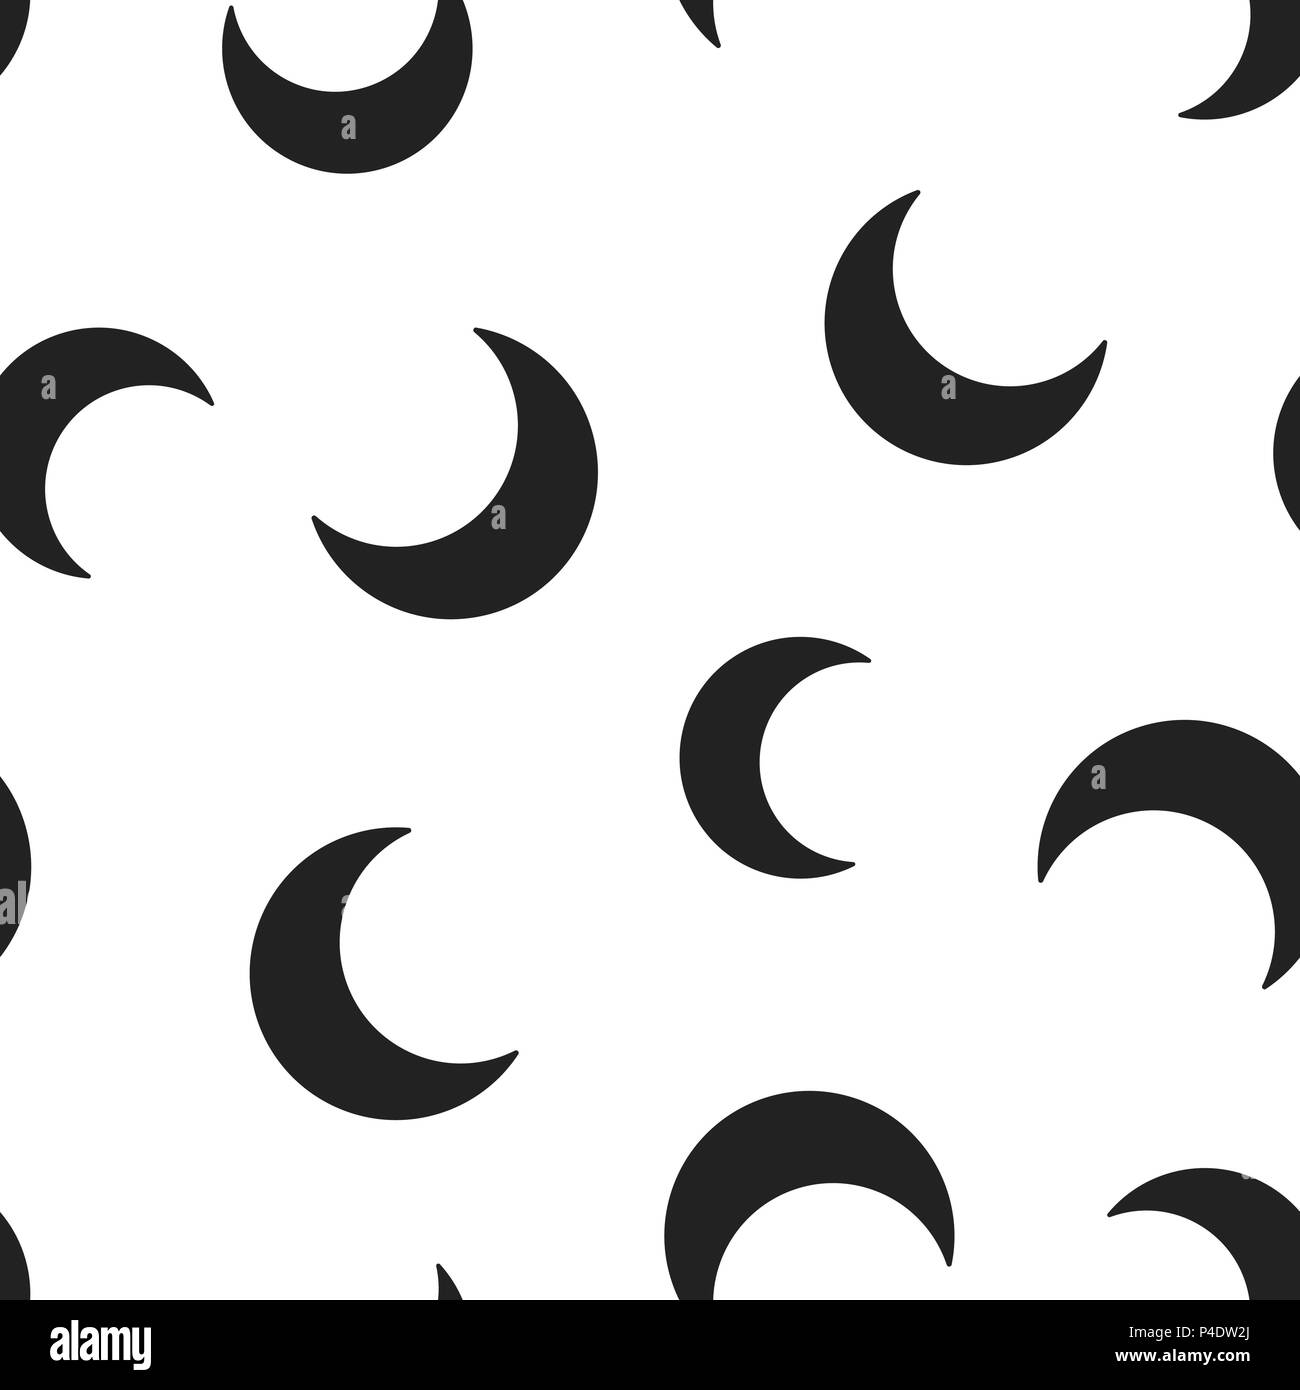 Nighttime moon icon seamless pattern background. Business concept vector illustration. Moon symbol pattern. Stock Vector